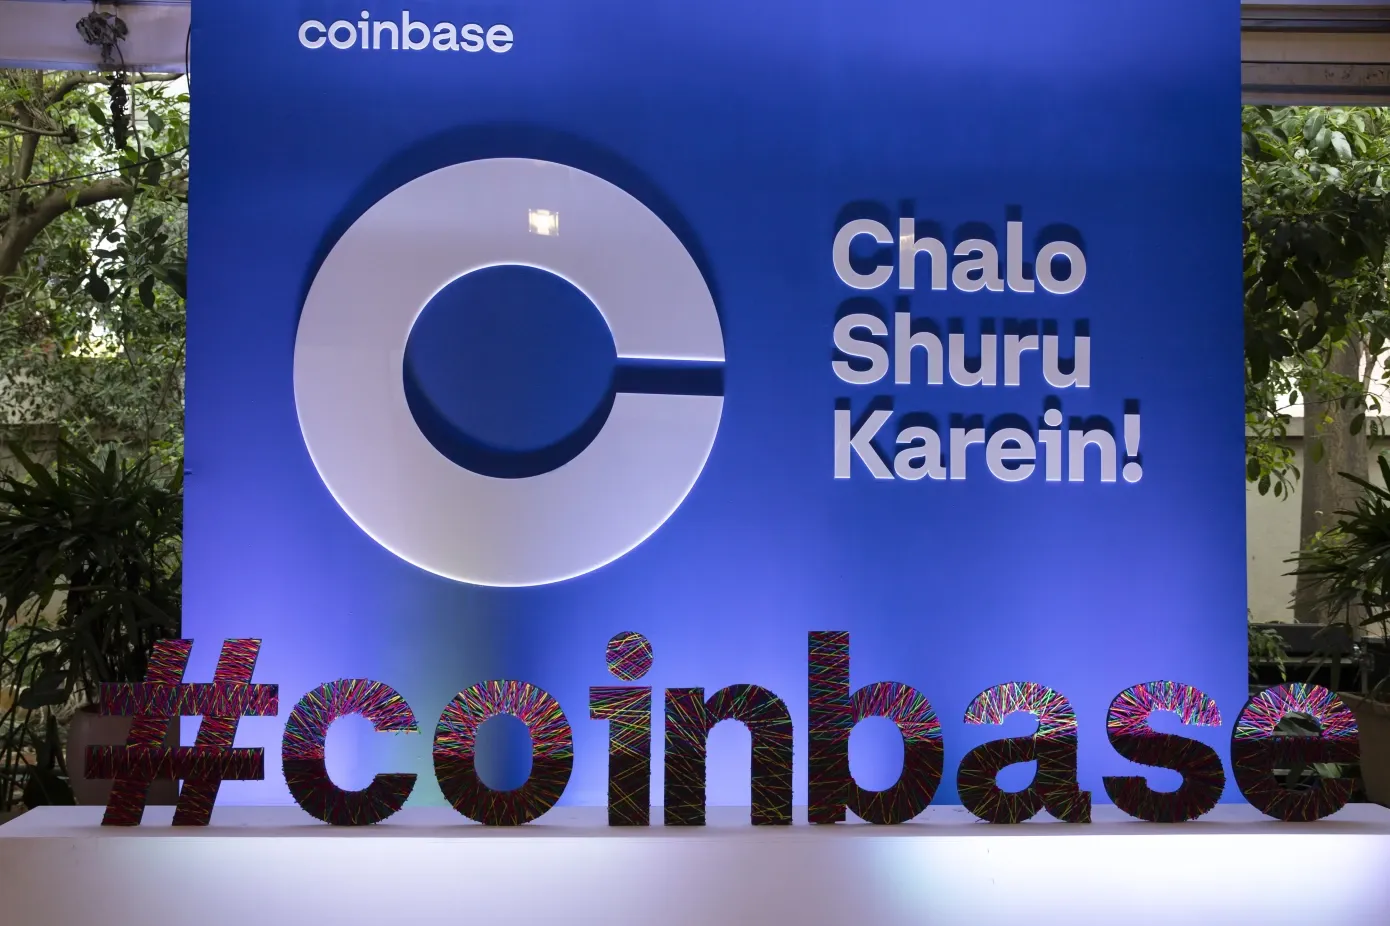 India's central bank's `informal pressure` prompted trading halt: Coinbase CEO